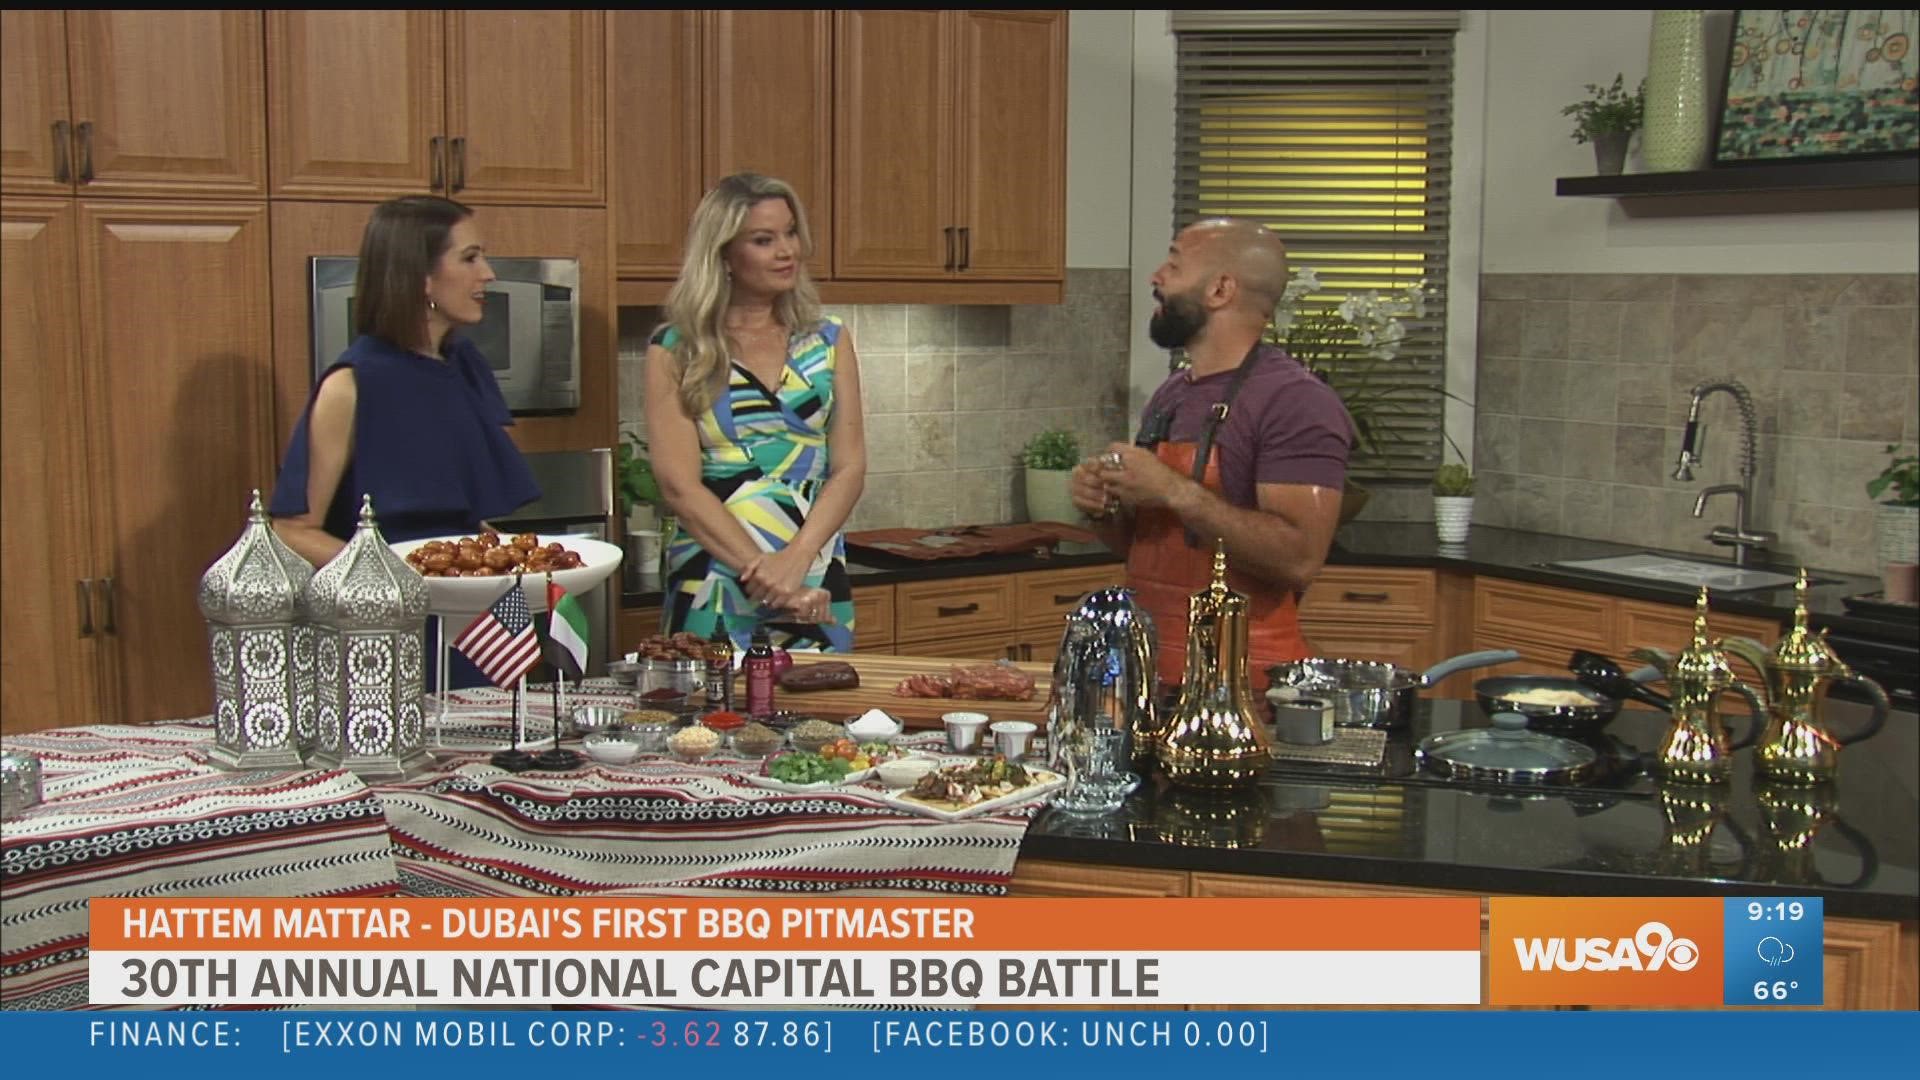 Dubai's first BBQ pitmaster Hattam Mattar joins Kristen and Ellen in the kitchen for a preview of what he's cooking at the 30th Giant National Capital BBQ Battle.